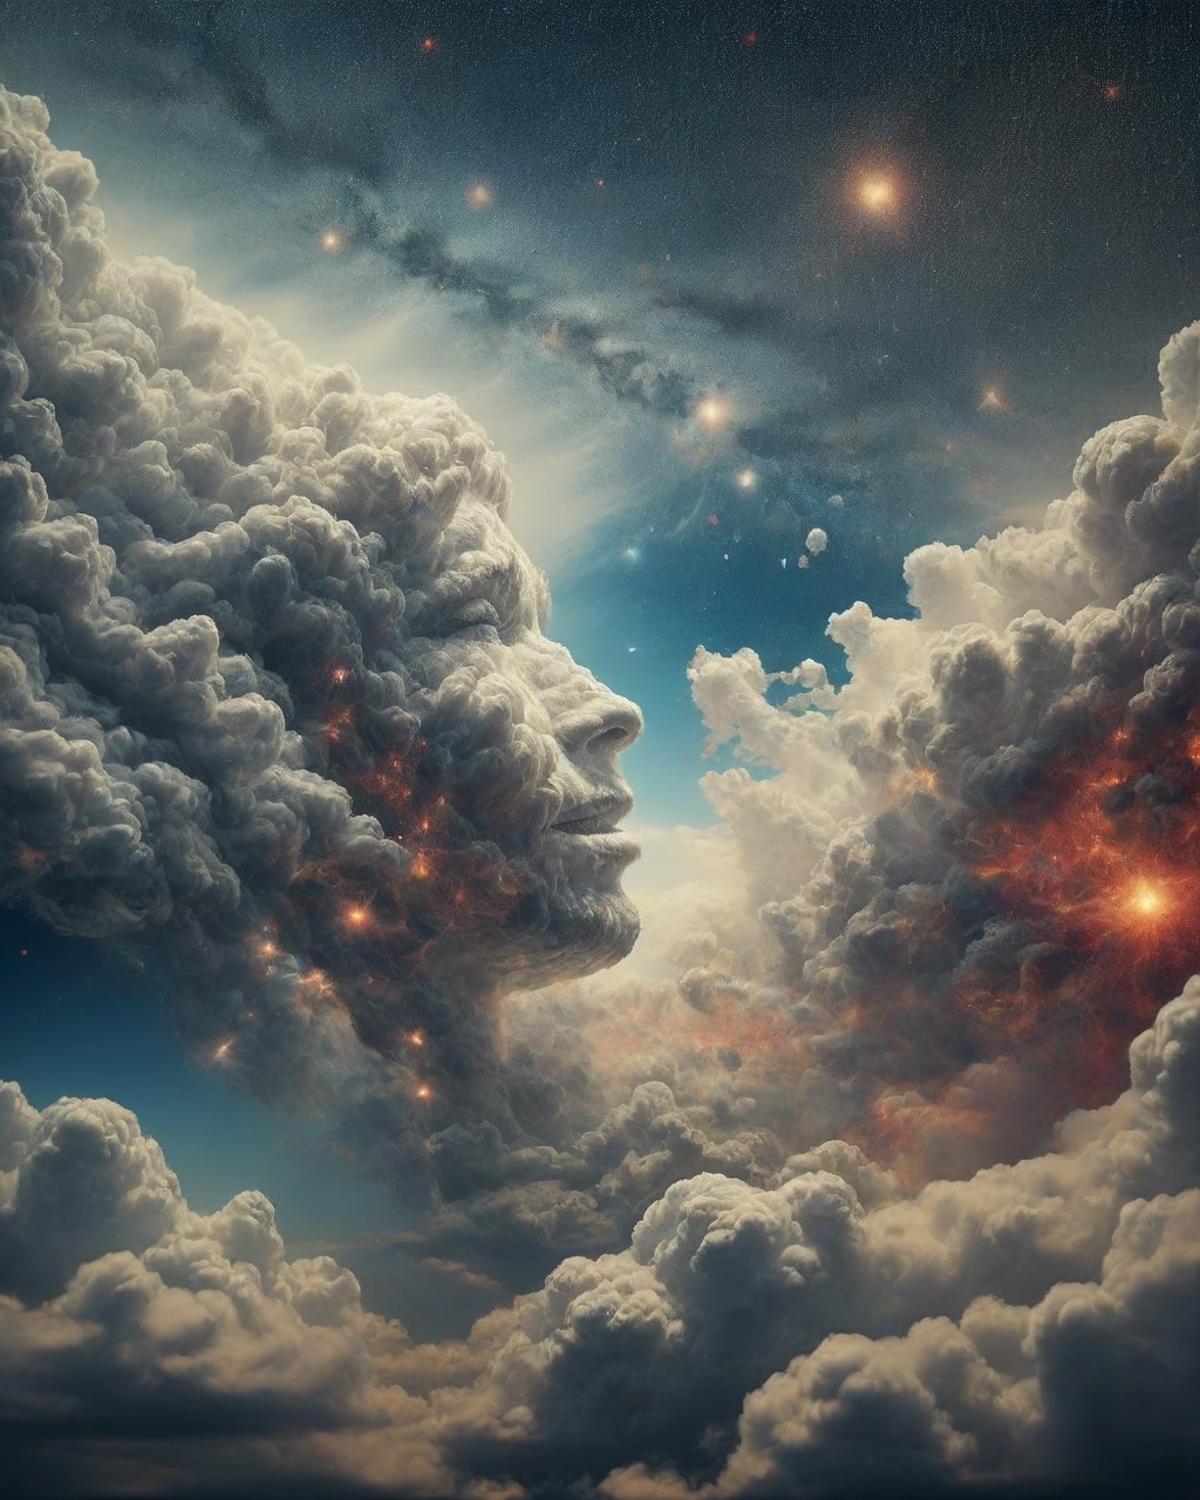 A person's face is seen through a cloudy sky with stars in the background.